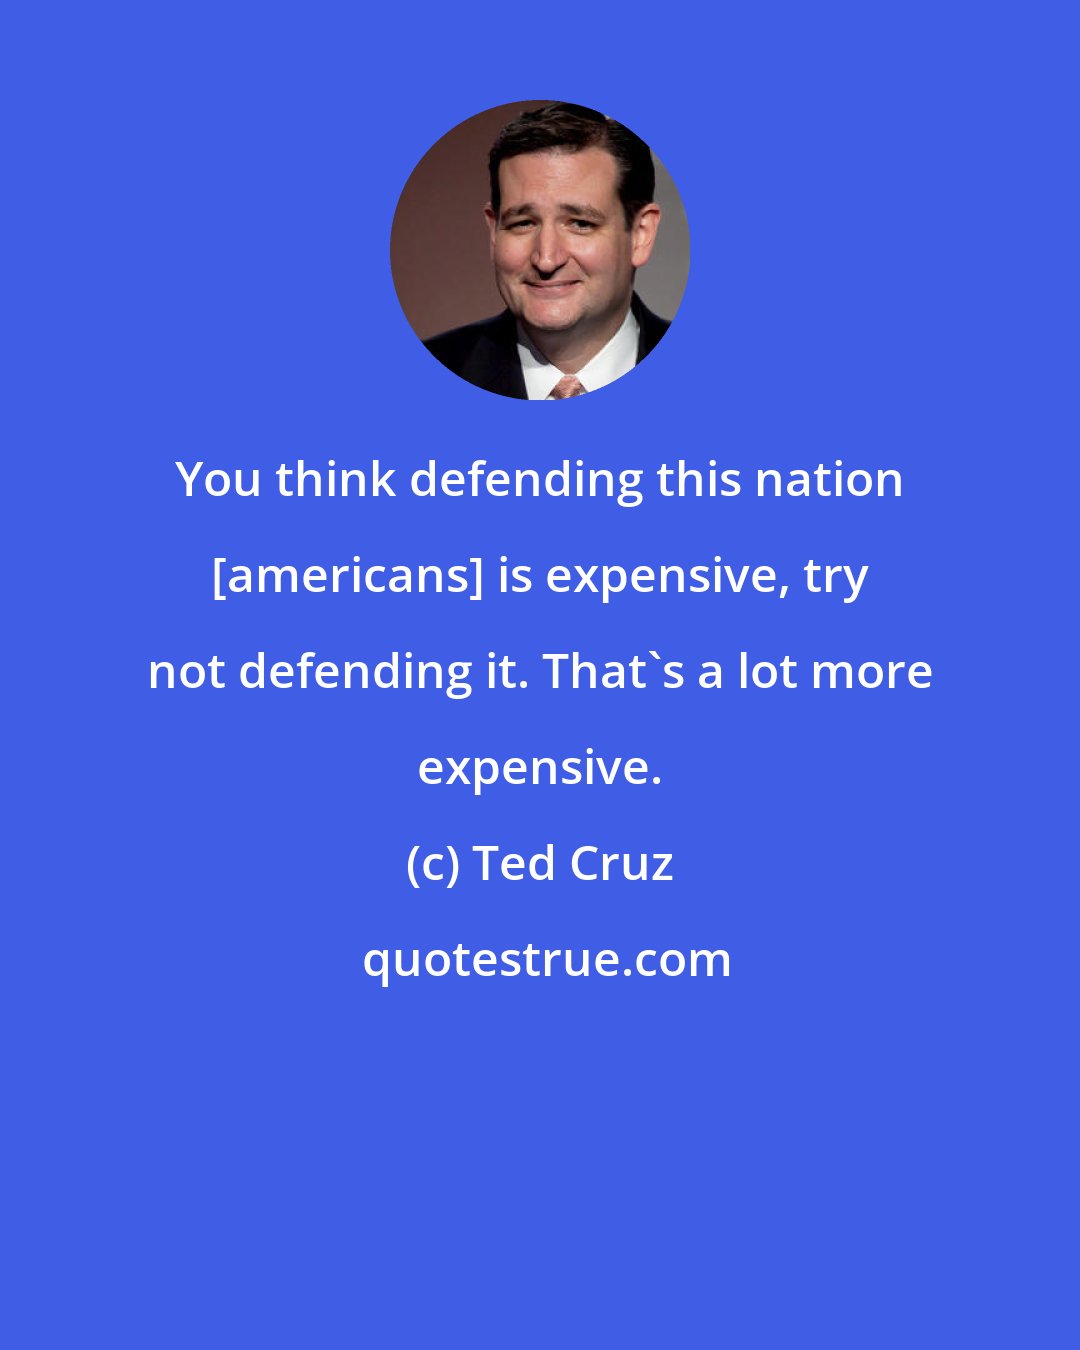 Ted Cruz: You think defending this nation [americans] is expensive, try not defending it. That's a lot more expensive.